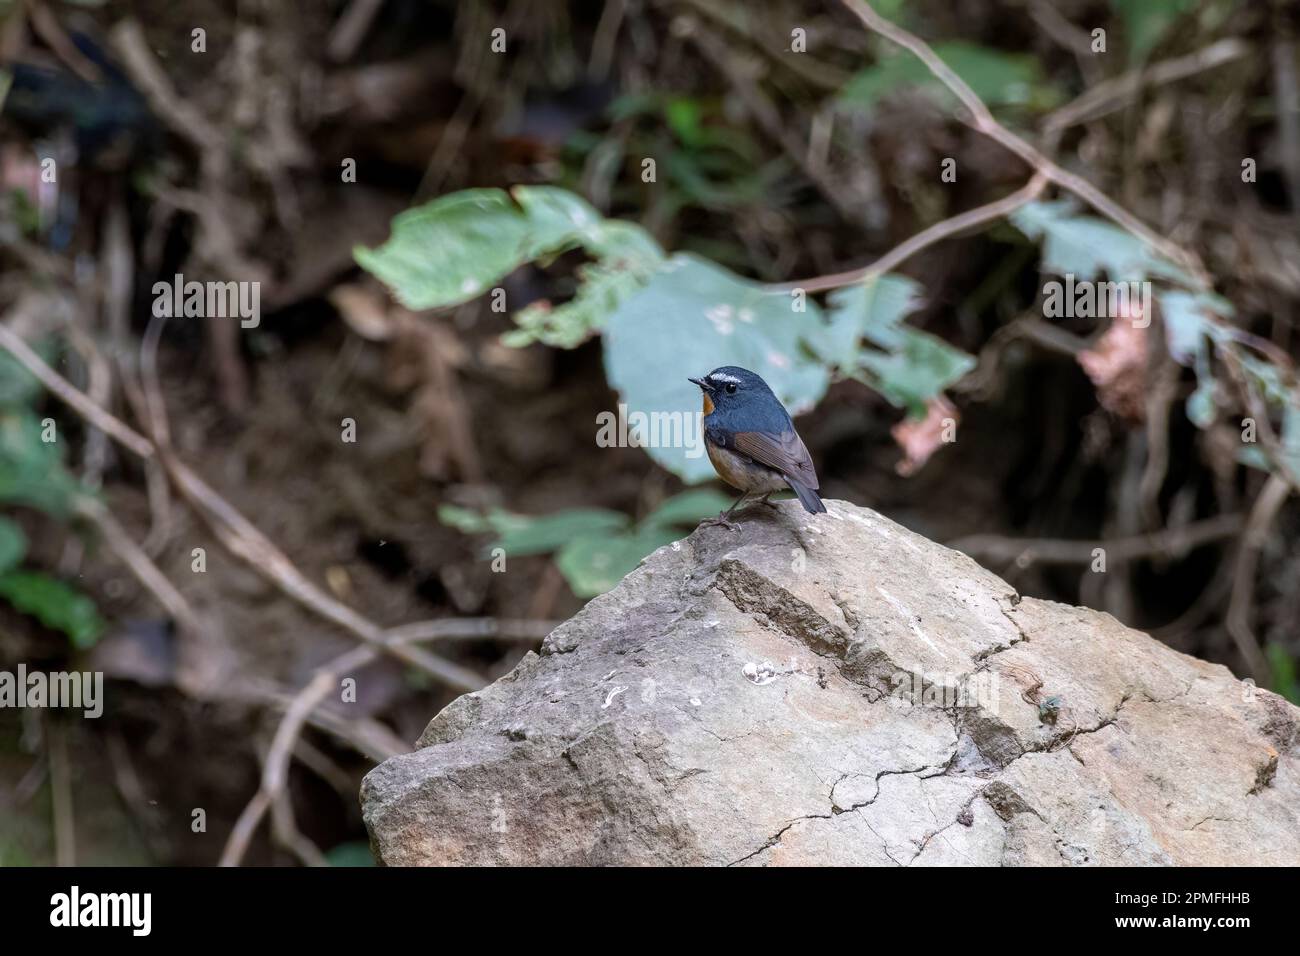 Snowy-browed flycatcher (Ficedula hyperythra) observed in Rongtong in West Bengal, India Stock Photo